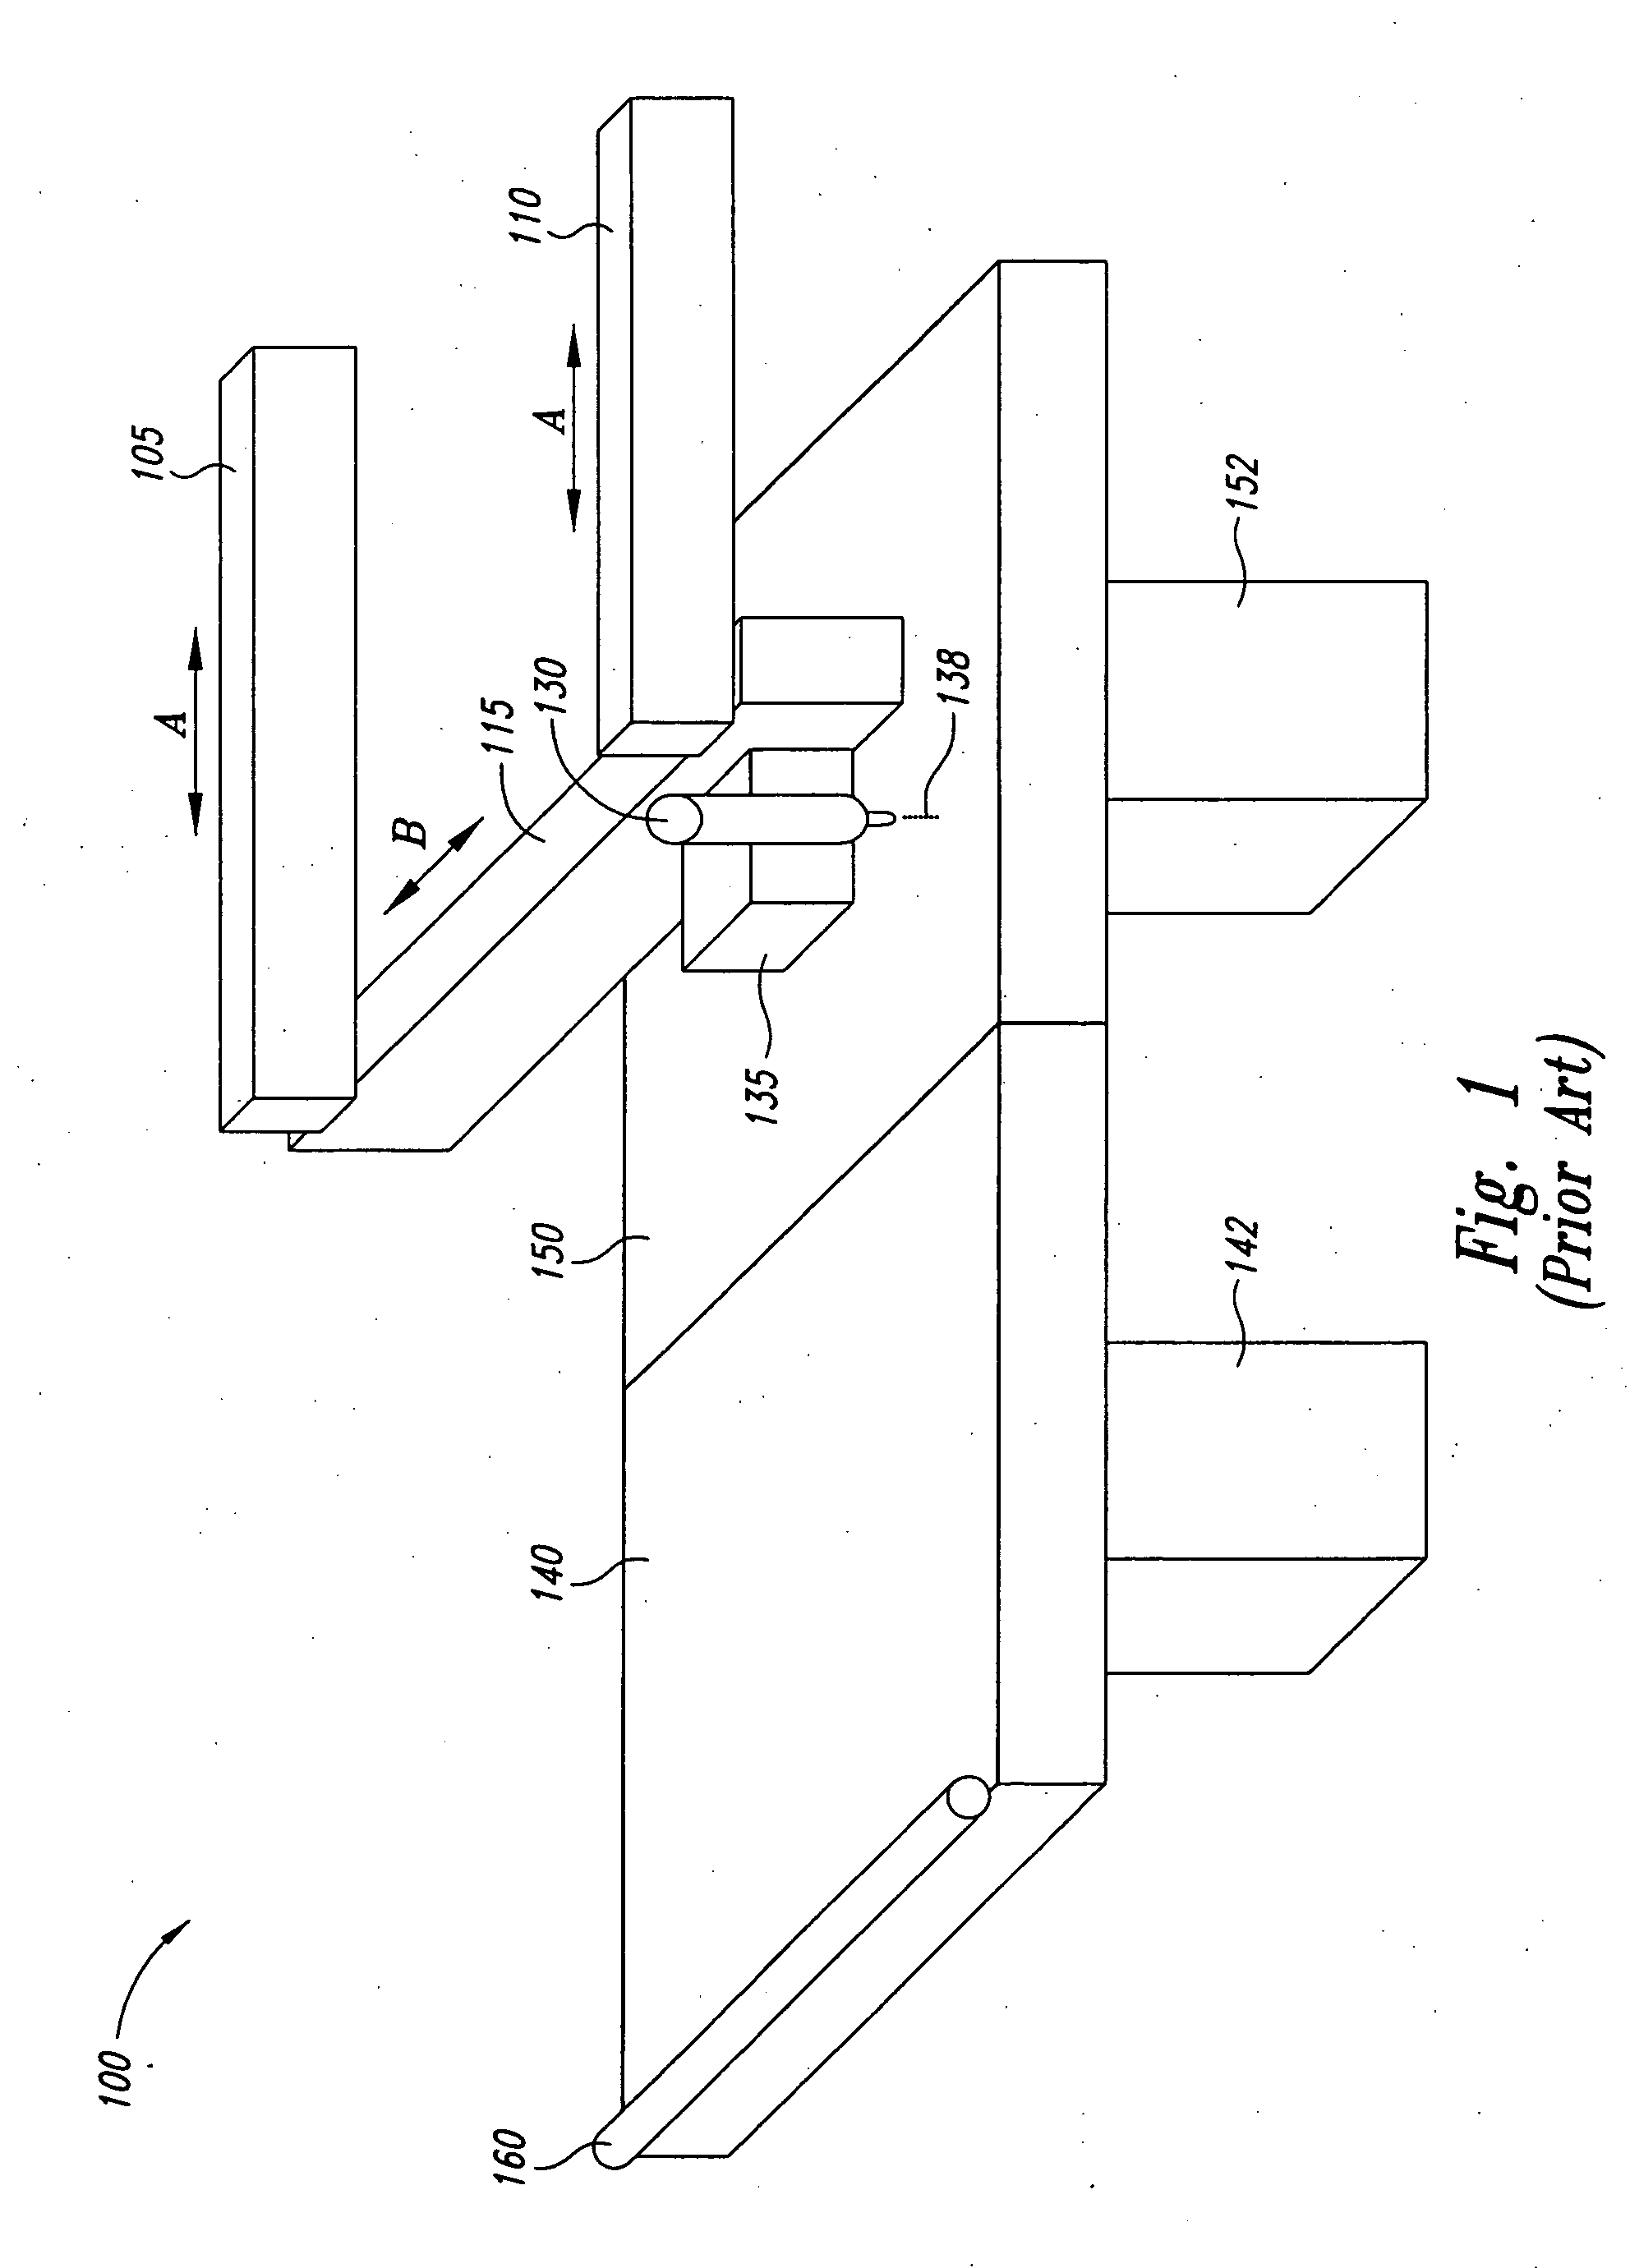 Method of manufacture, installation, and system for a sinus lift bone graft